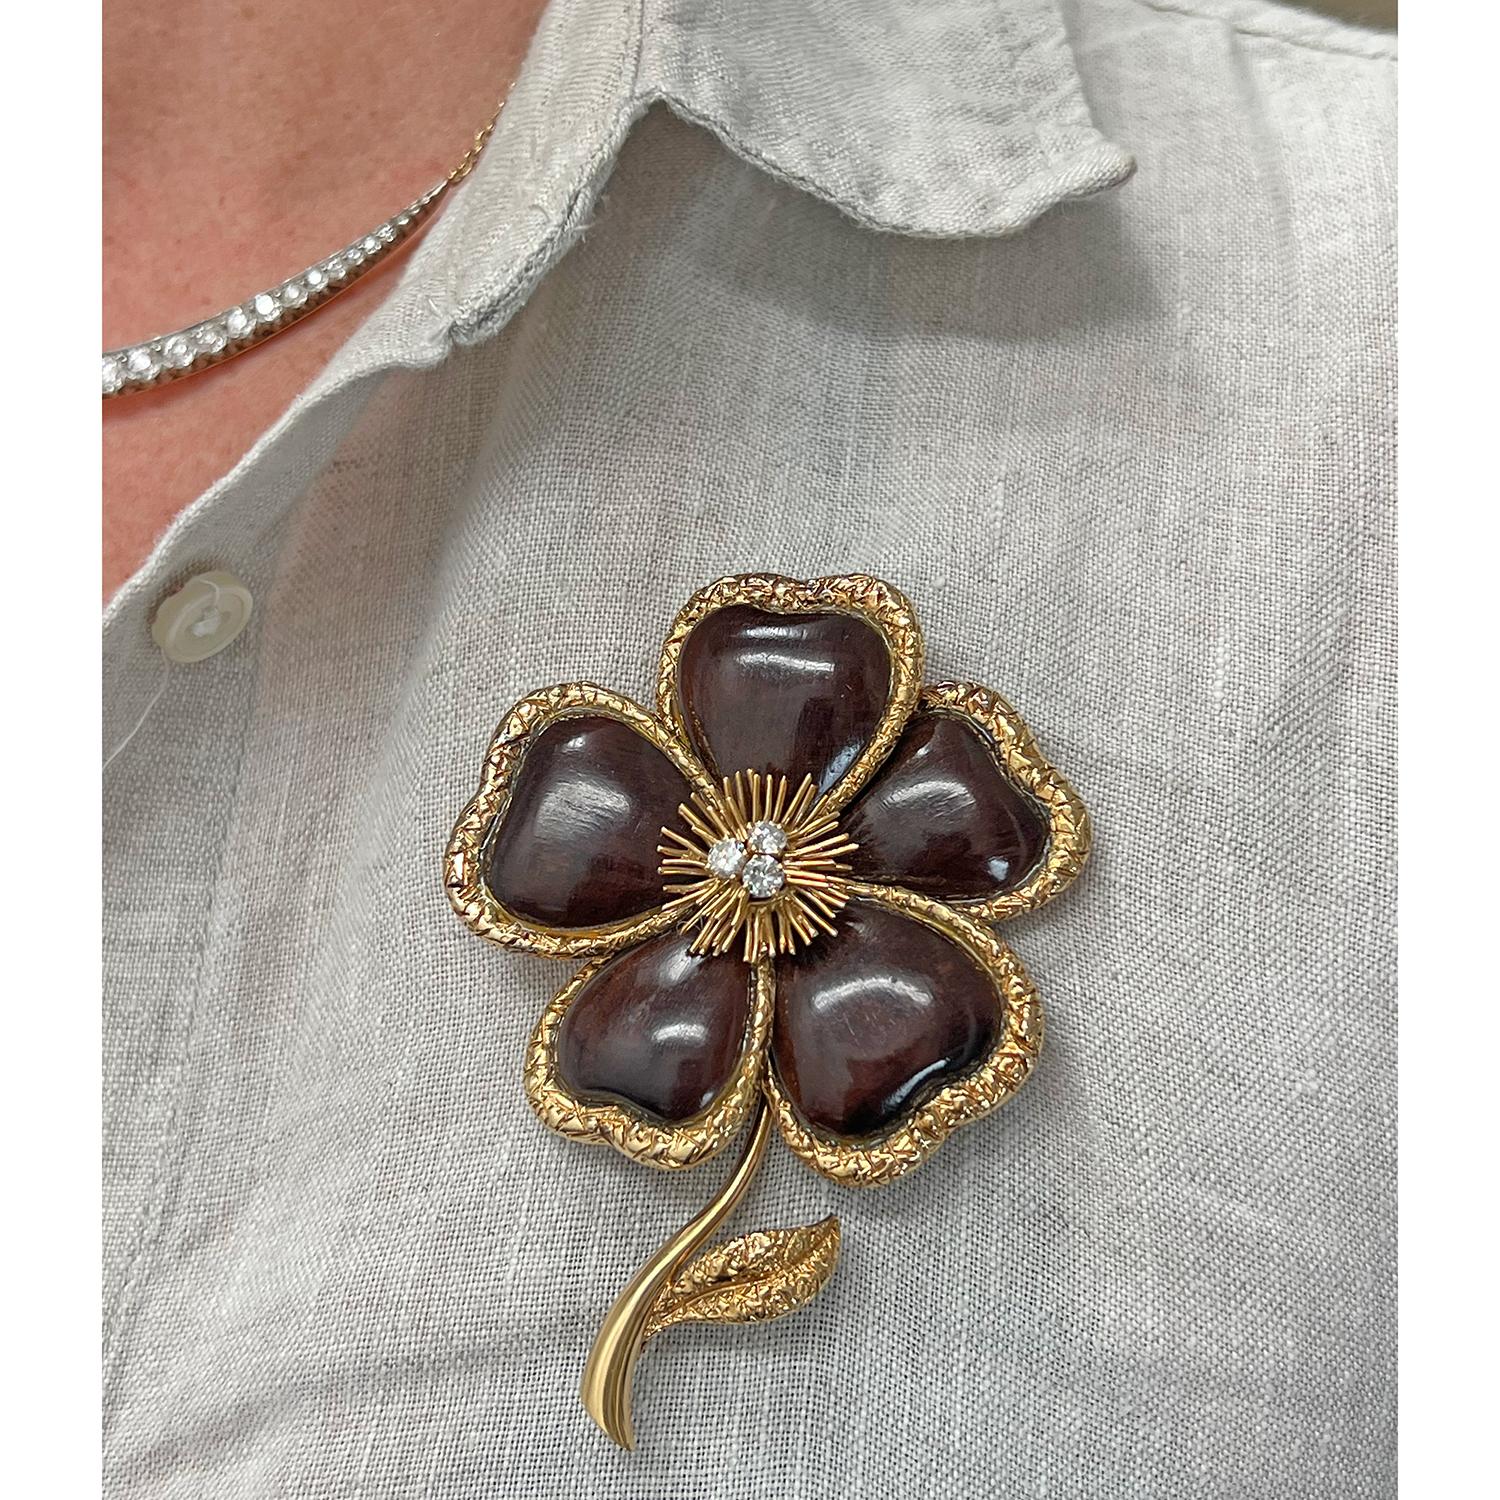 Brilliant Cut Van Cleef & Arpels Large 18k Yellow Gold Diamond Wood Clematis Brooch For Sale